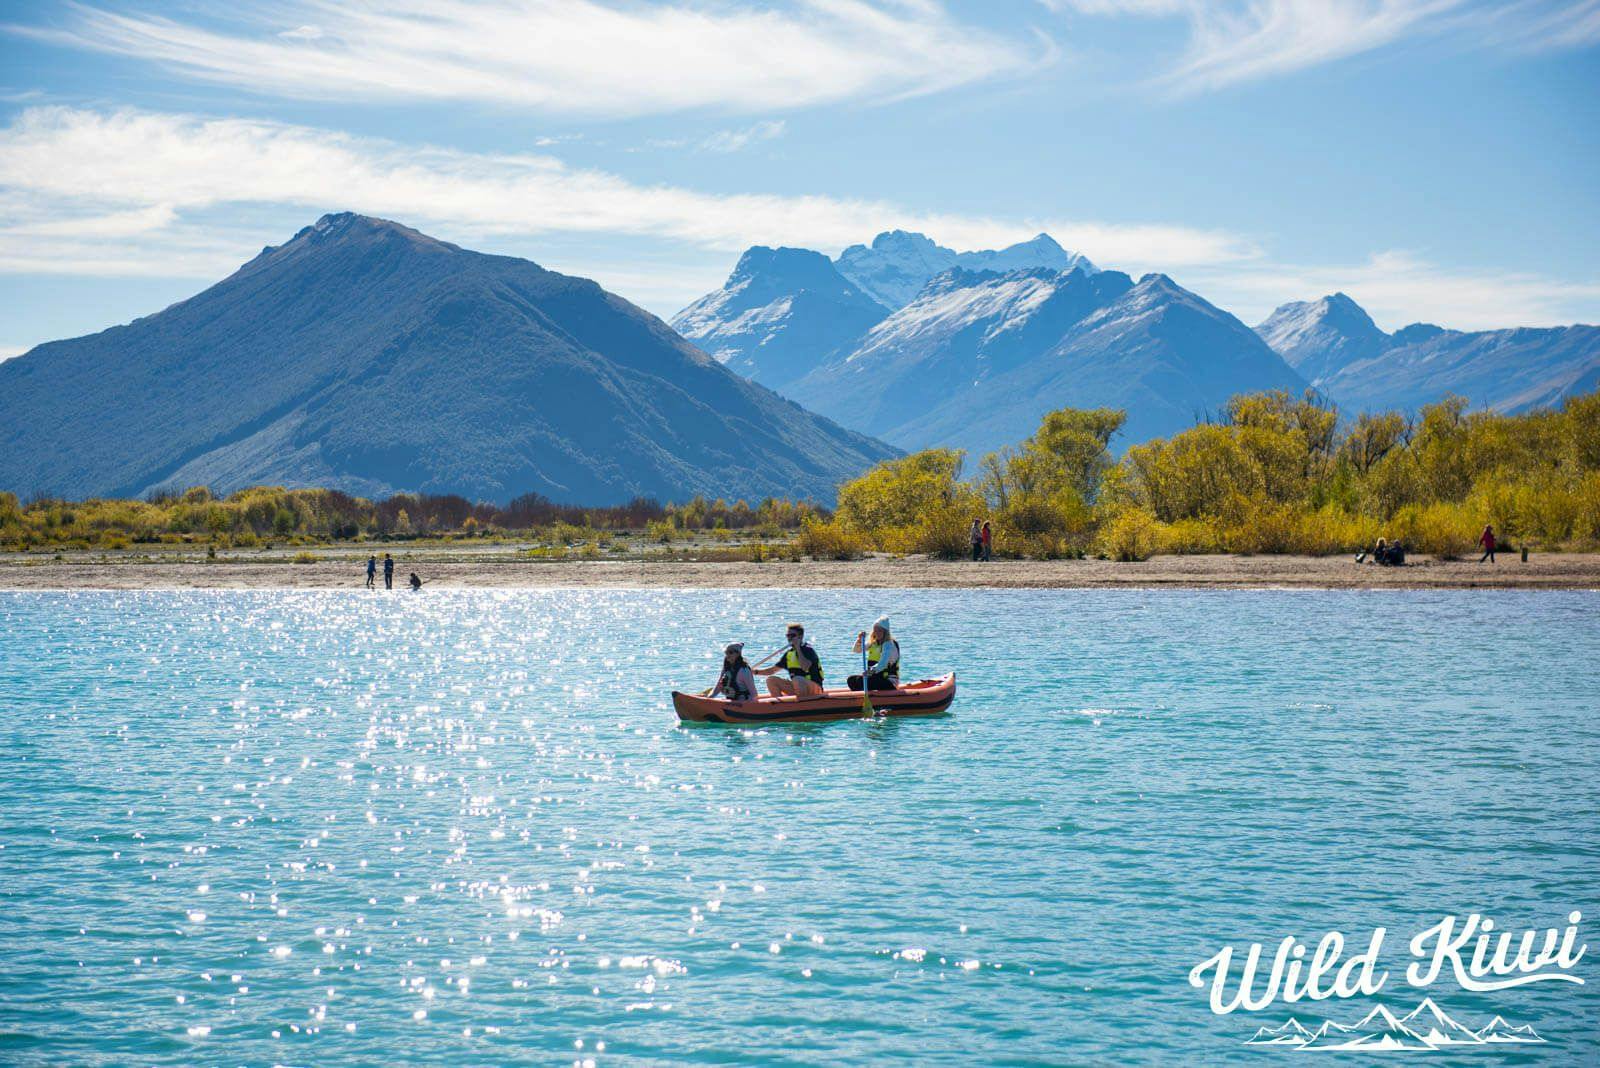 Visit the mountains and lakes on a New Zealand tour - Take in all that the South Island has to offer